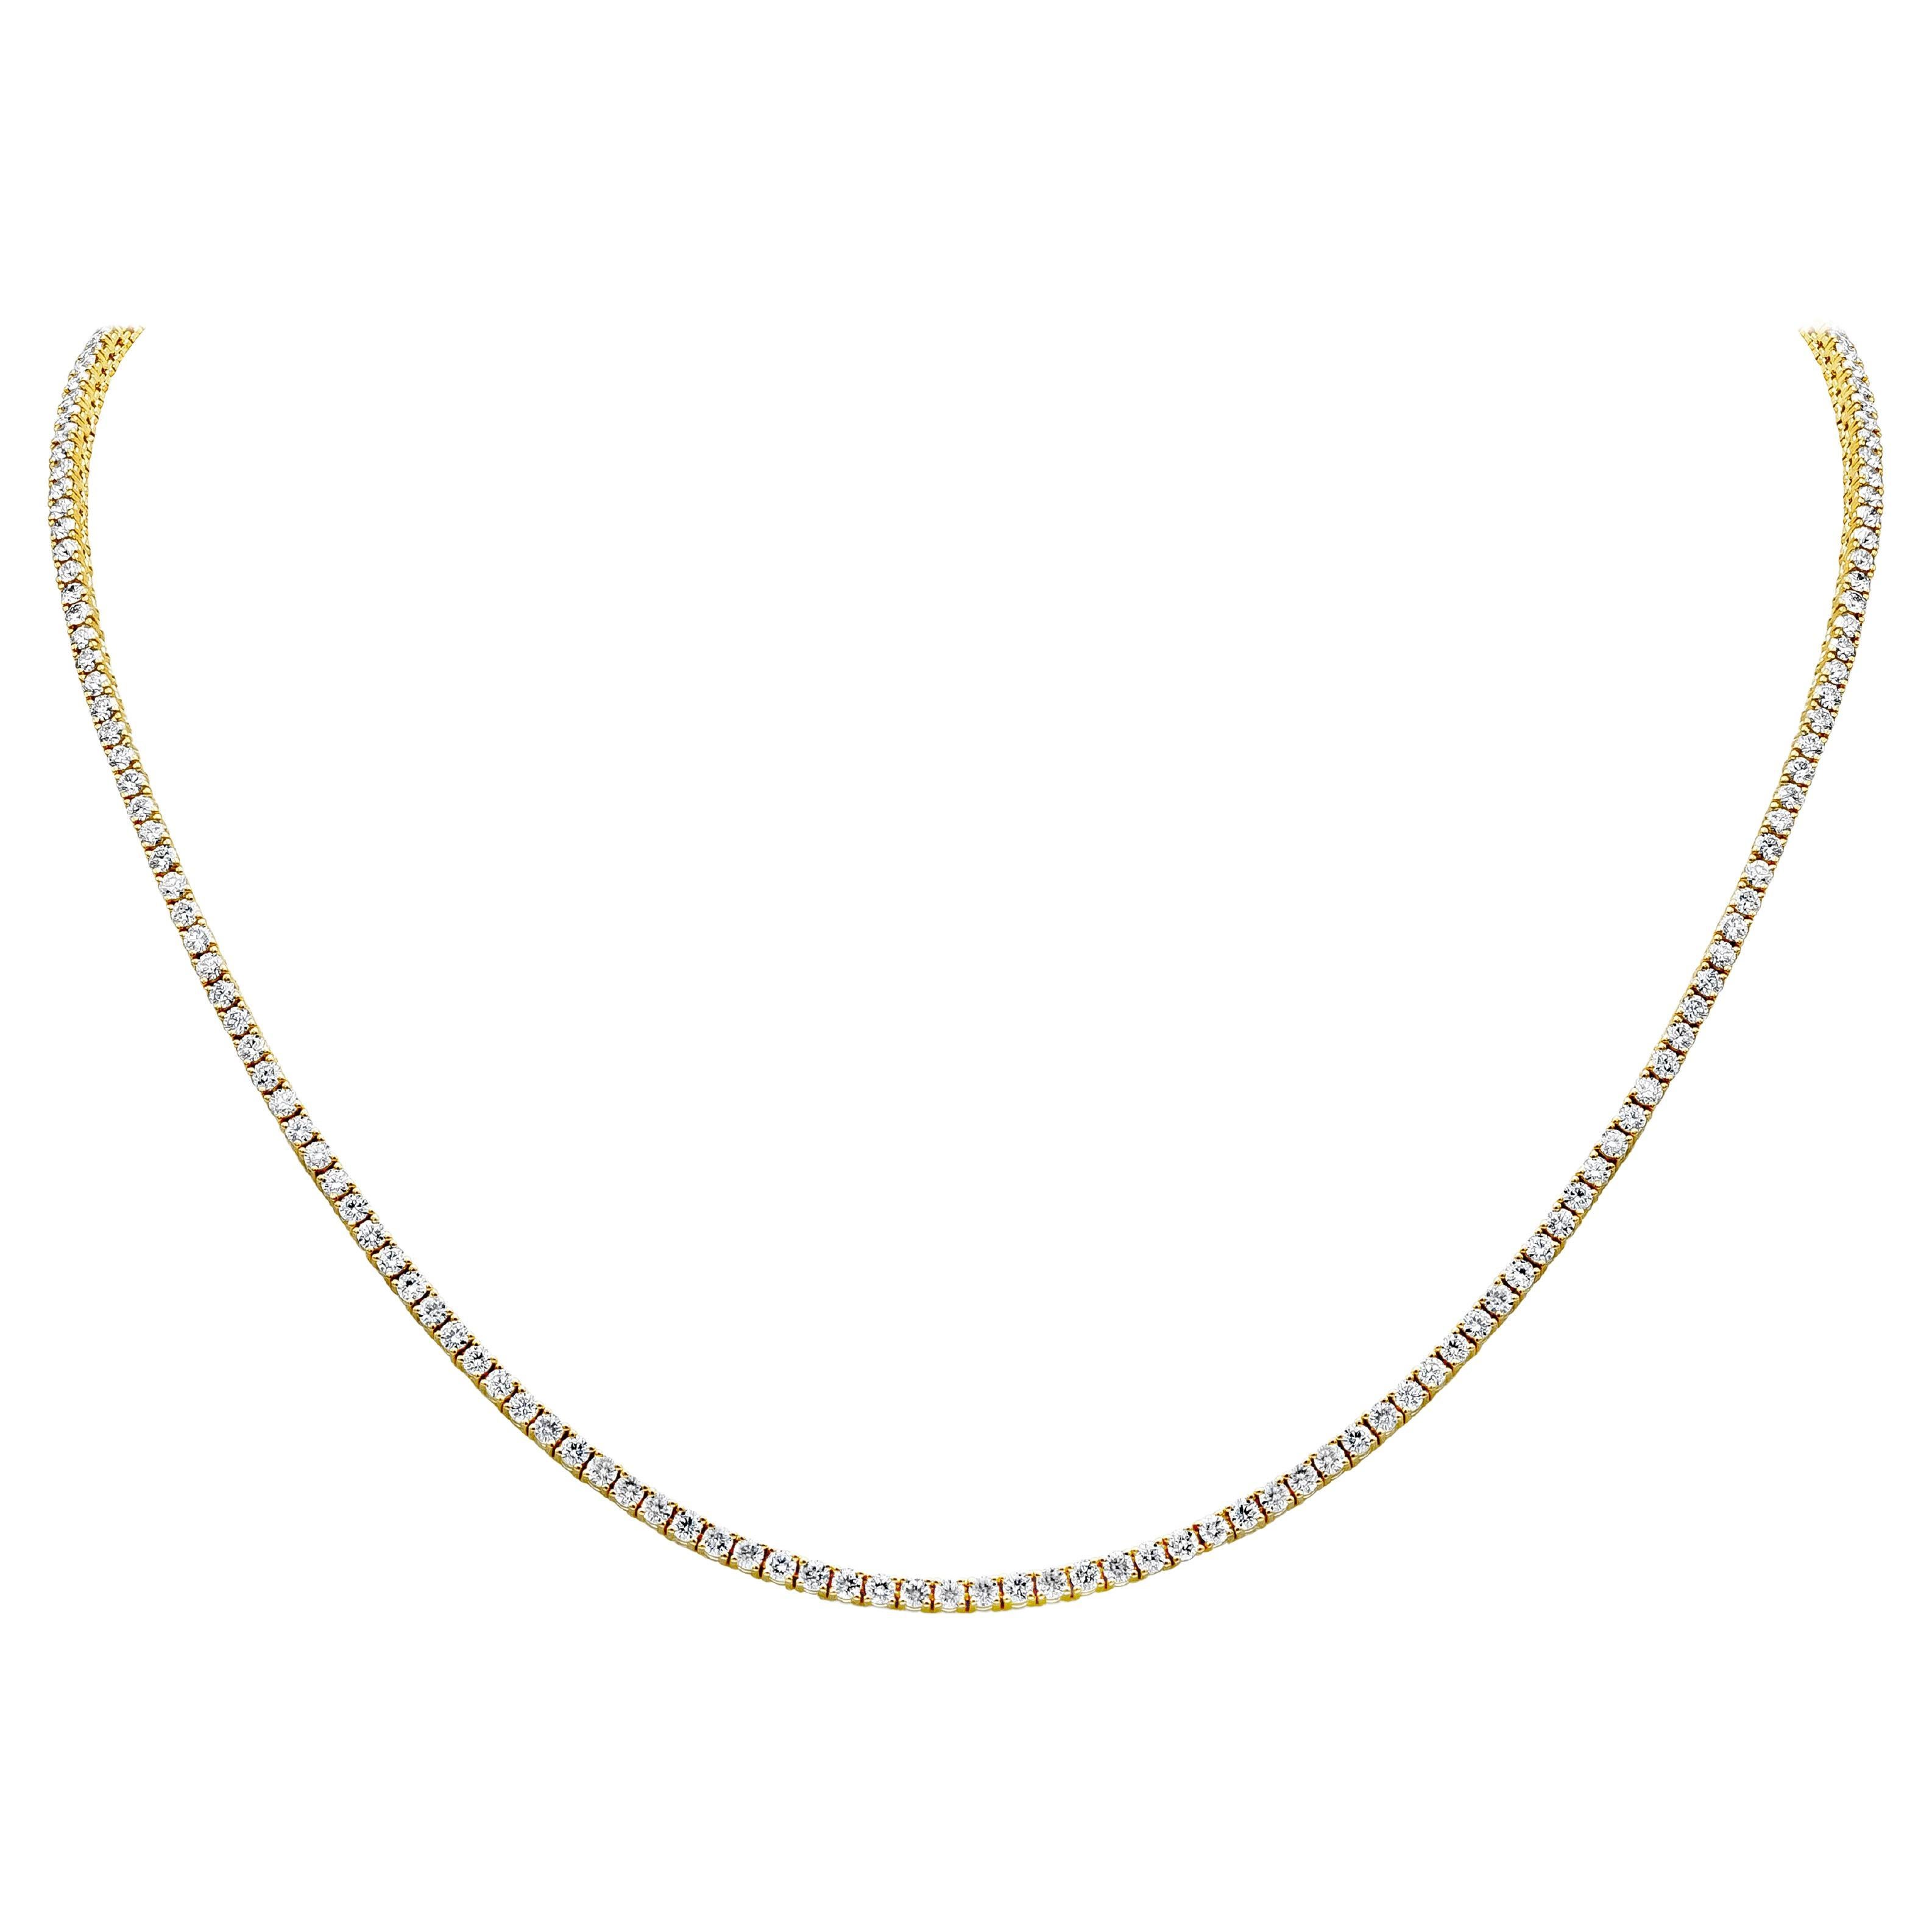 Roman Malakov 7.52 Carat Total Round Diamond Tennis Necklace in Yellow Gold For Sale